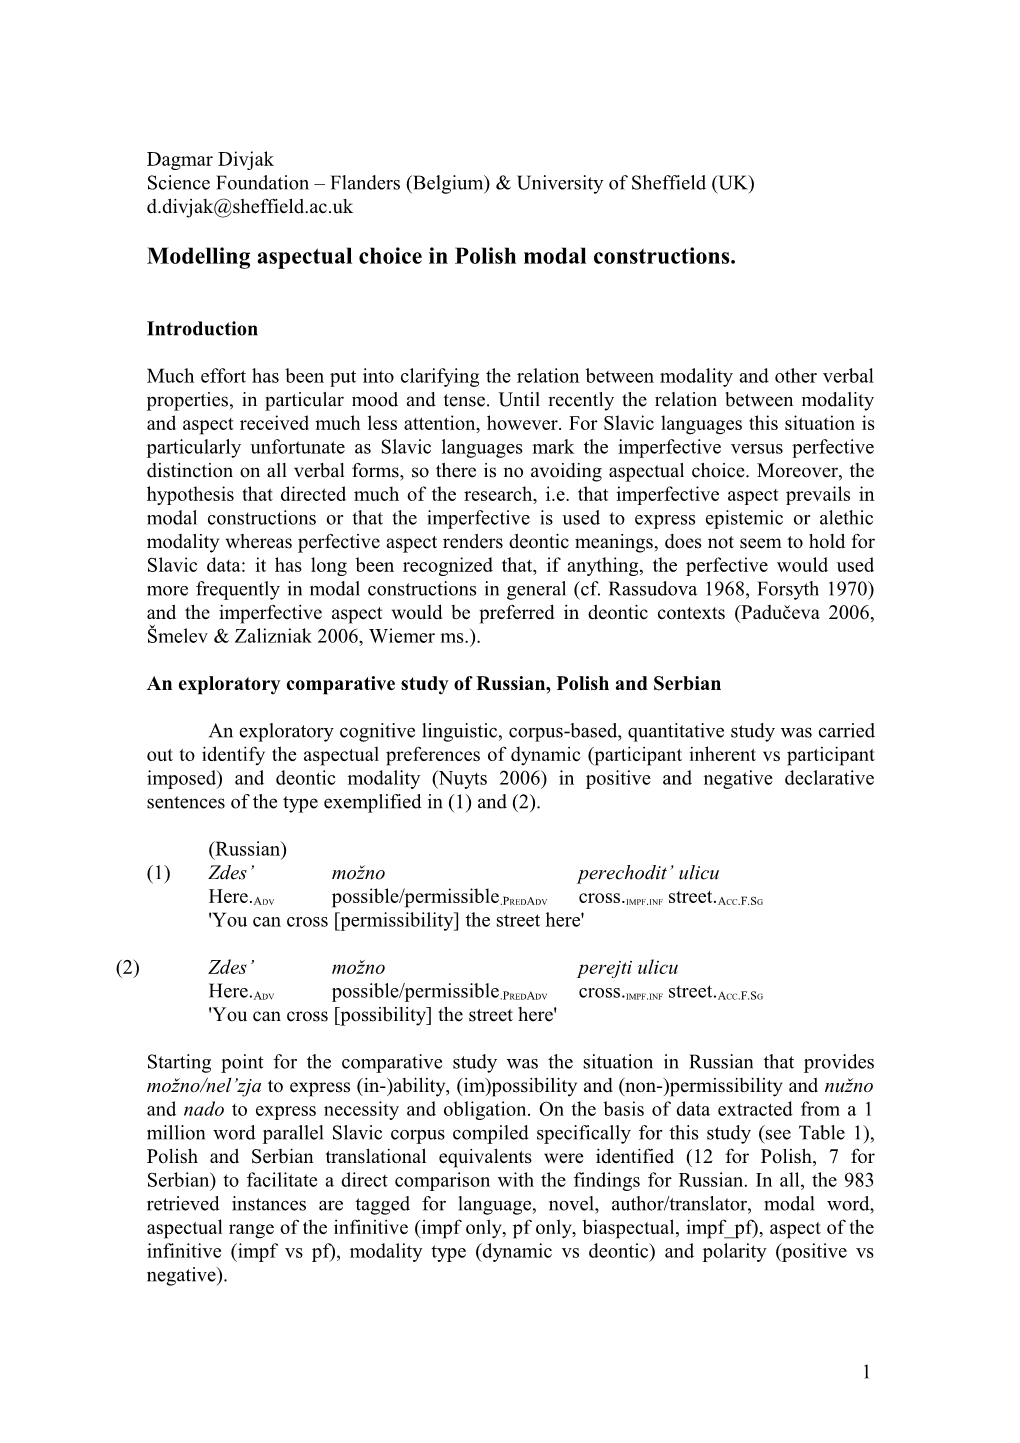 Modelling Aspectual Choice in Polish Modal Constructions